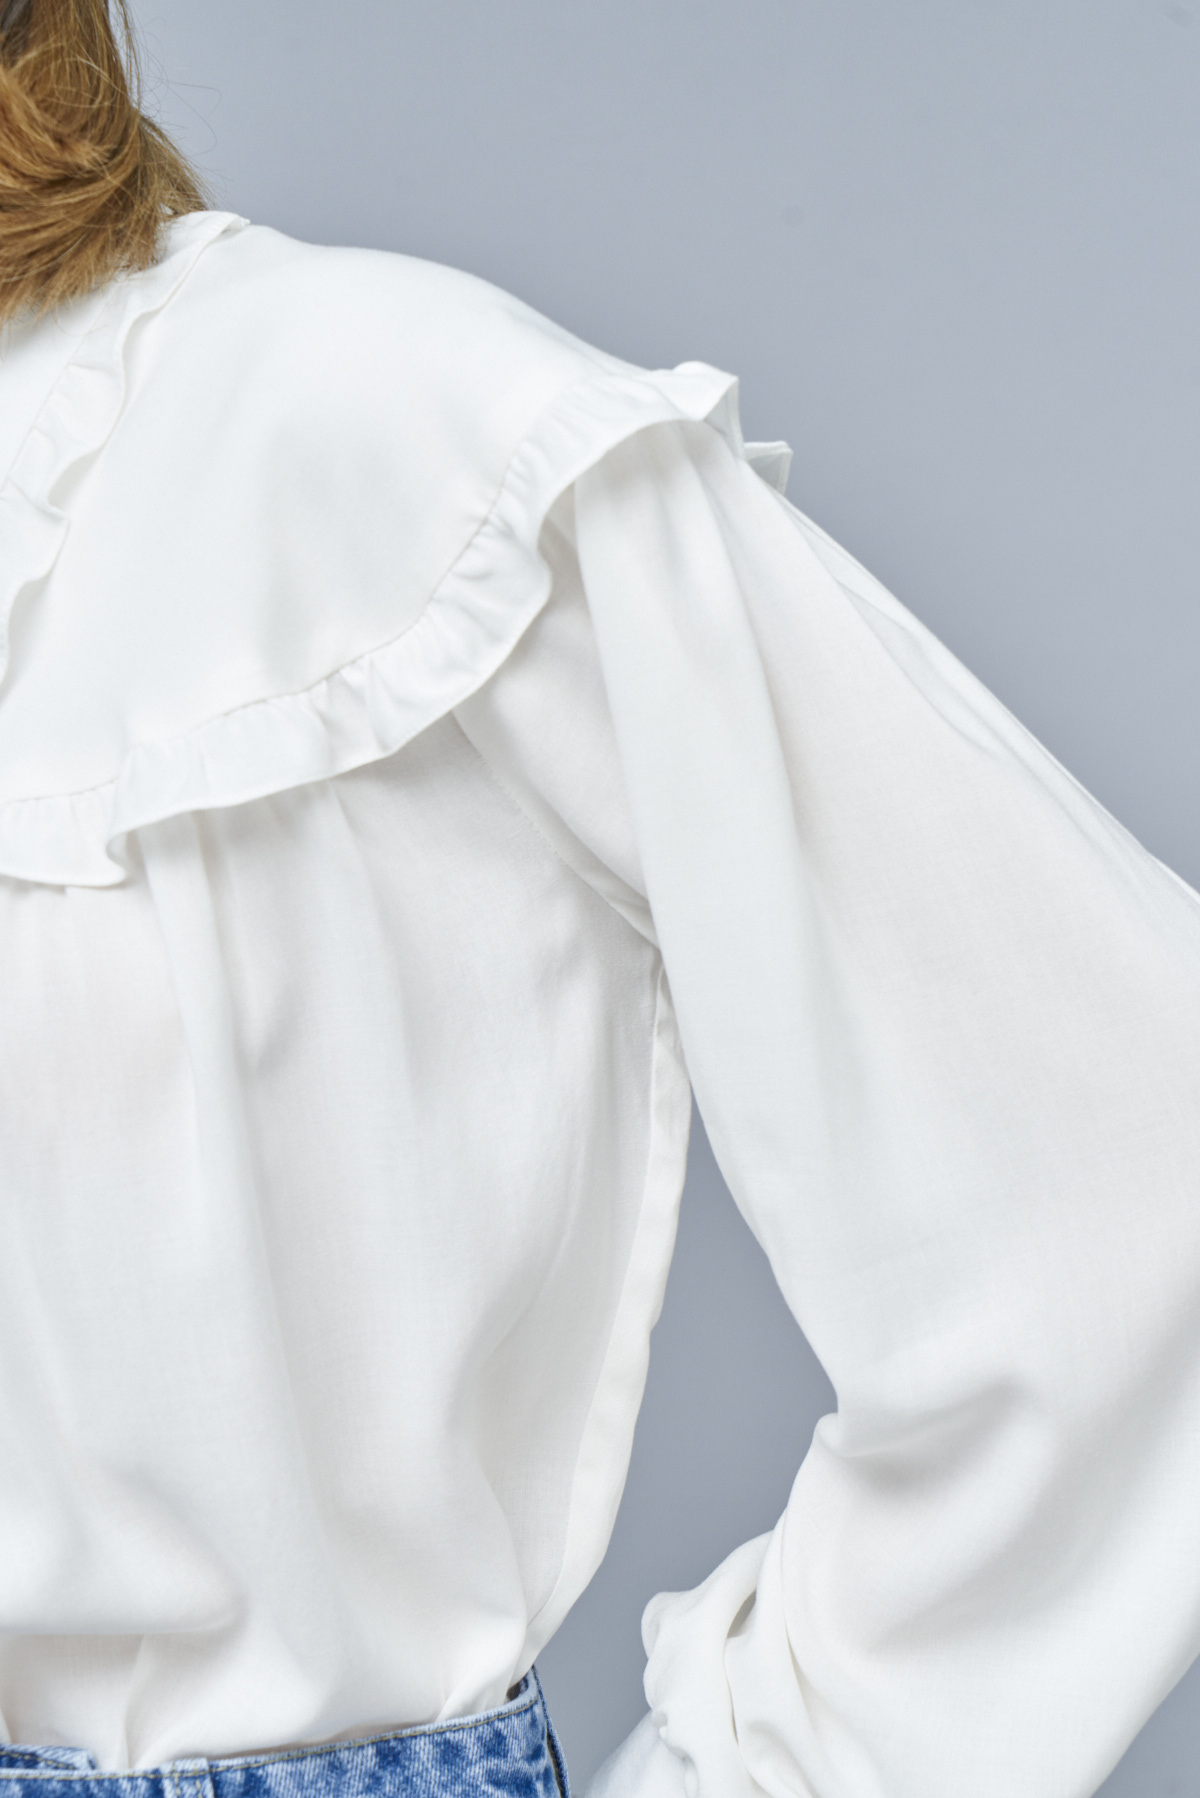 Milk-colored blouse-shirt with ruffles, photo 7